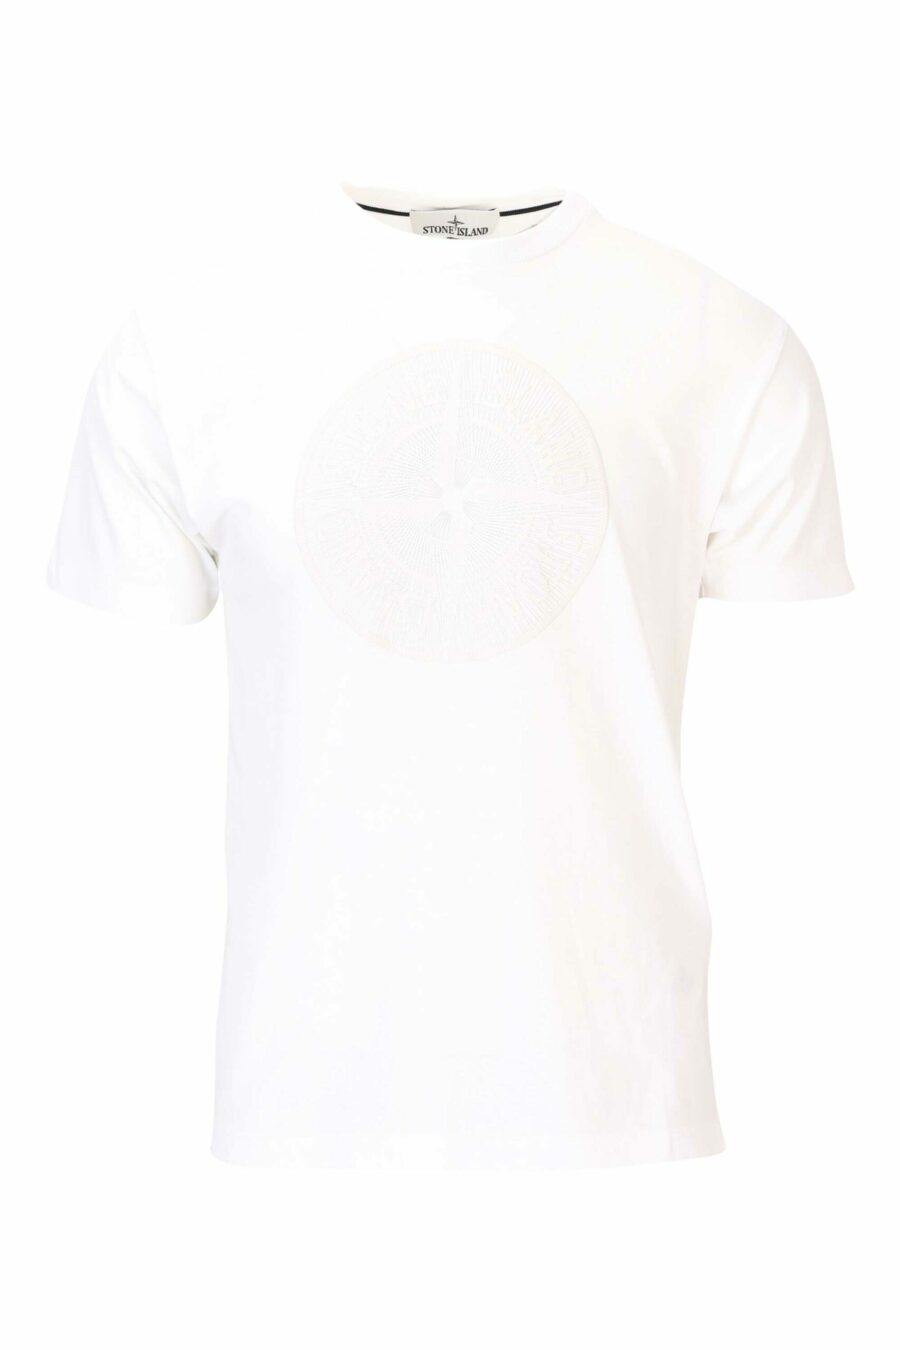 White T-shirt with circular maxilogo on the front - 8052572742361 scaled